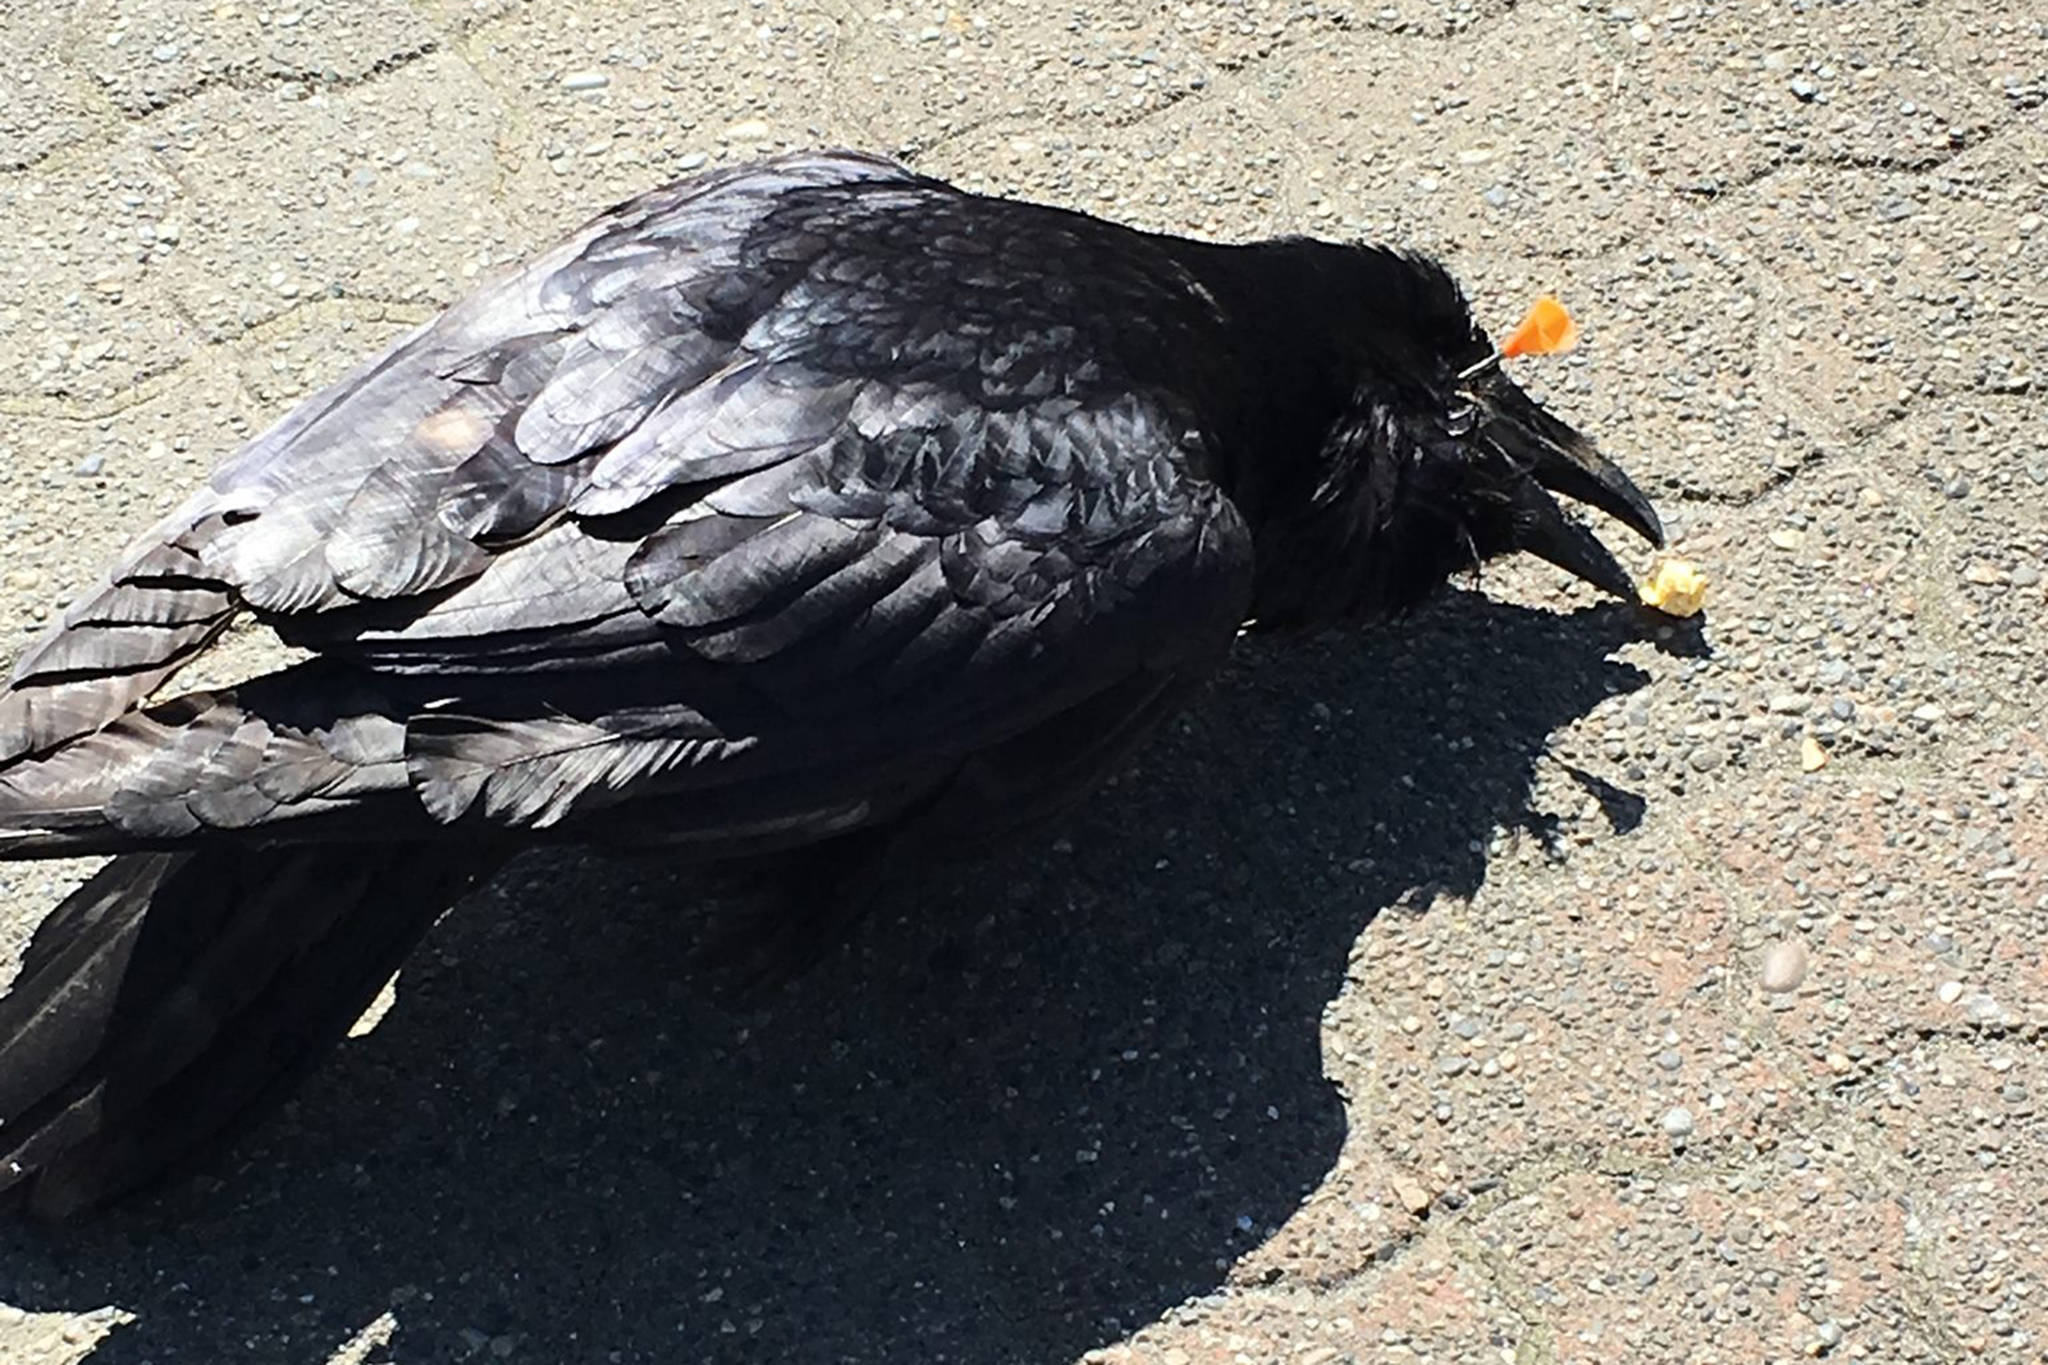 For almost two months, this raven has survived with a blow dart in its head